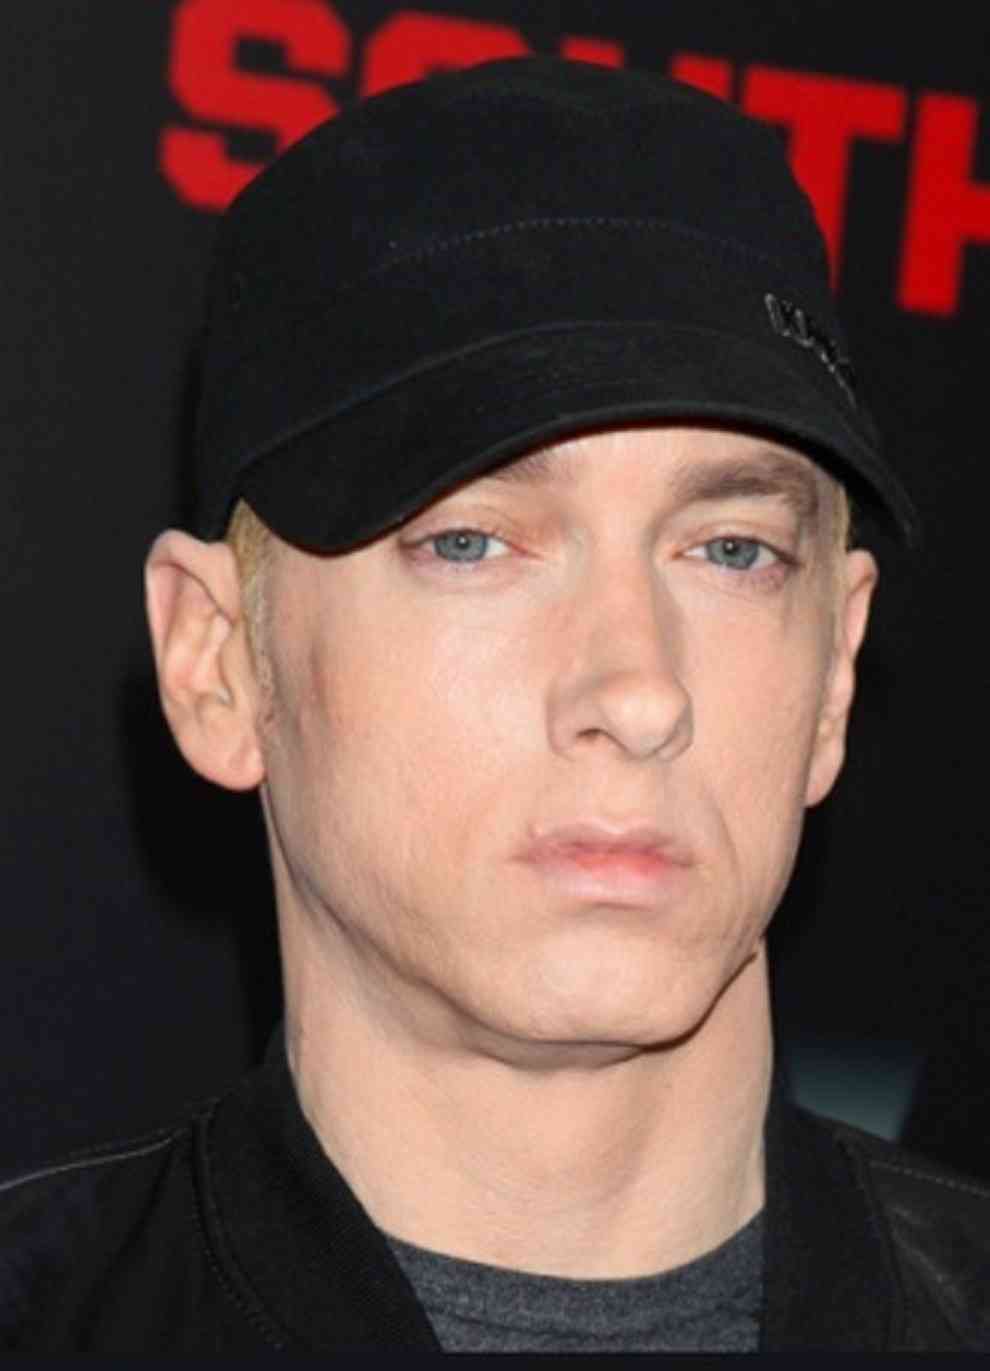 Conspiracy Theory Eminem Died in 2006 and his Bone Samples were Used to Create a Clone Makes "RIP Eminem" Go Viral